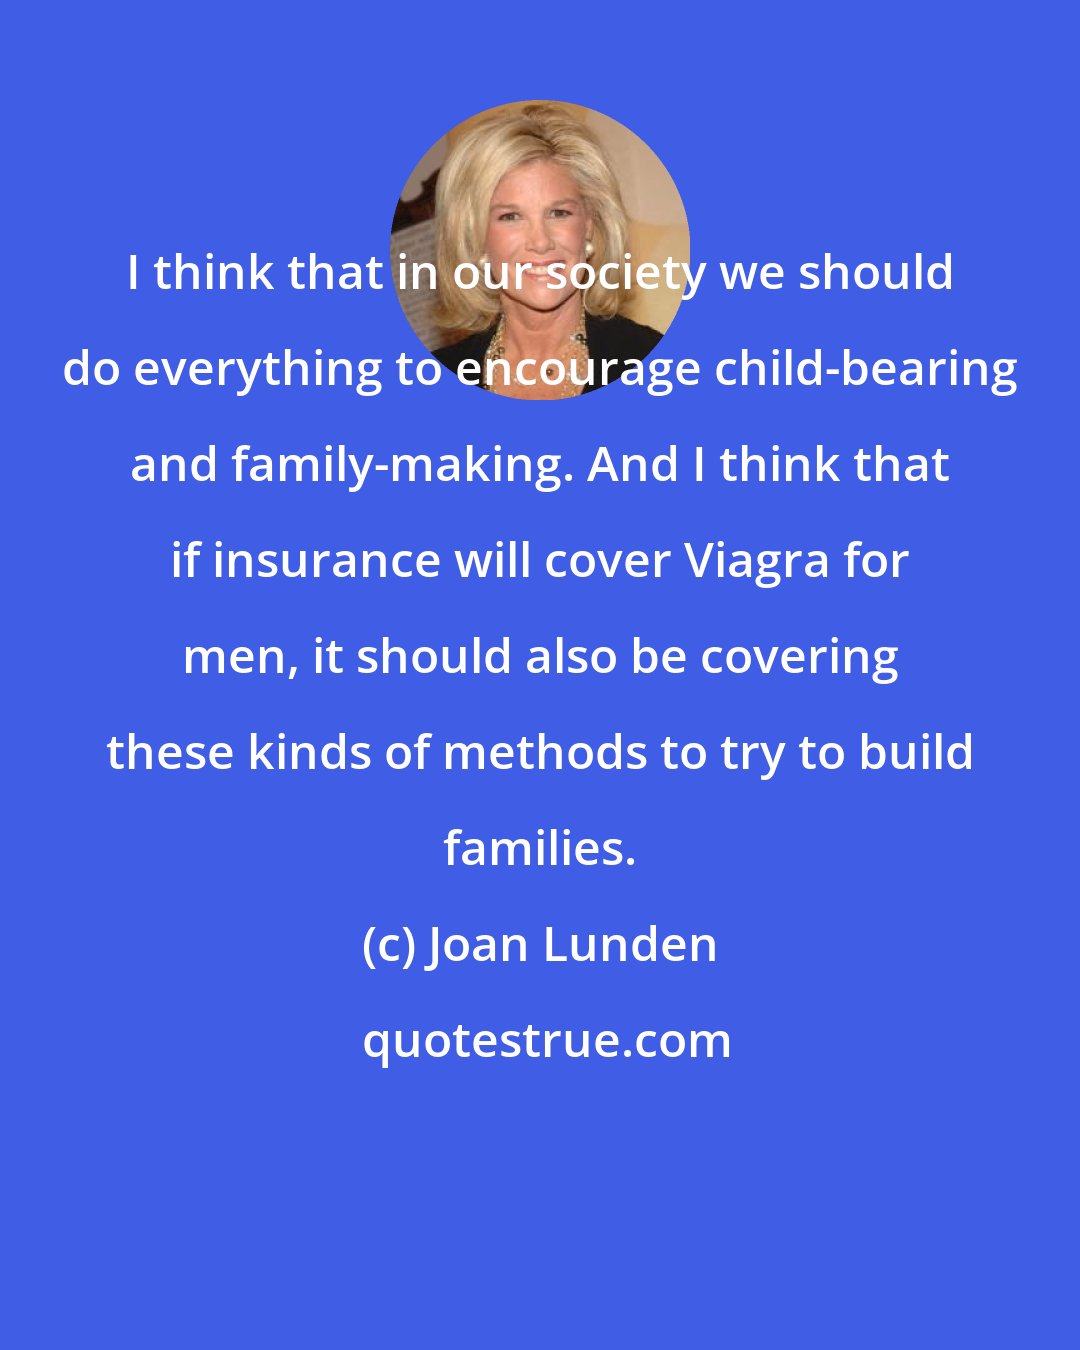 Joan Lunden: I think that in our society we should do everything to encourage child-bearing and family-making. And I think that if insurance will cover Viagra for men, it should also be covering these kinds of methods to try to build families.